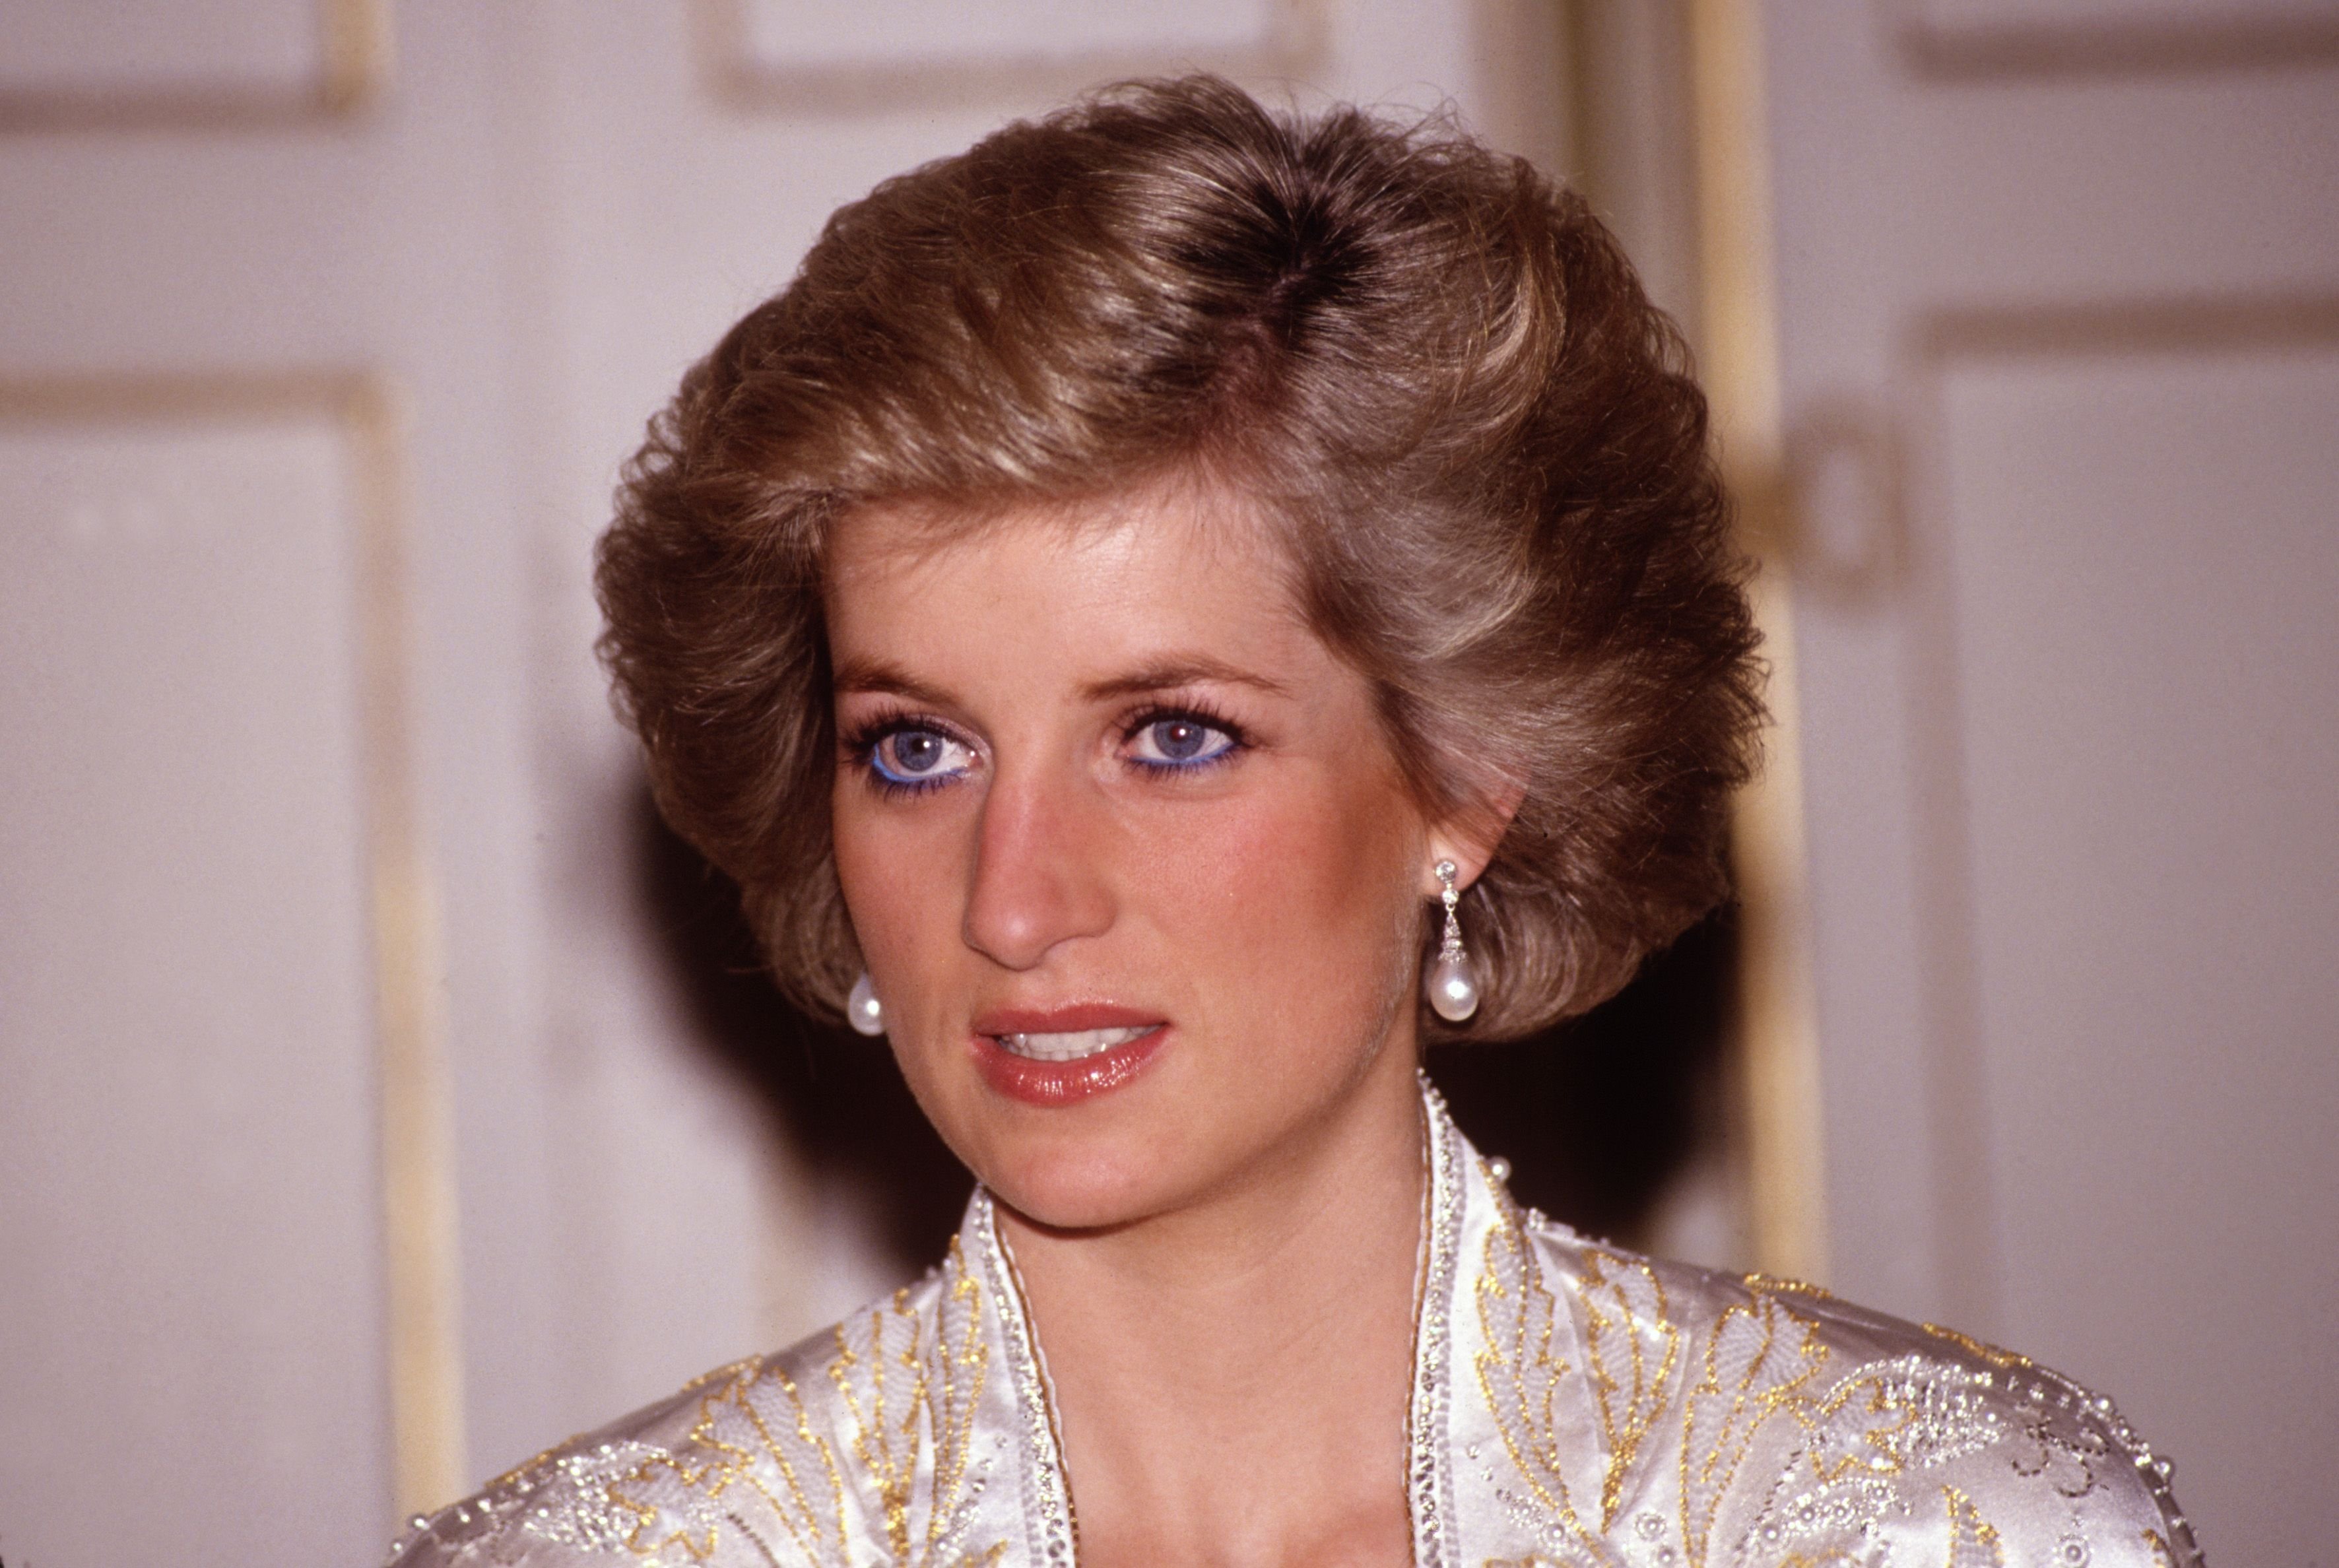 Princess Diana during a dinner given by President Mitterand on November 1, 1988, at the Elysee Palace in Paris, France. | Source: Getty images